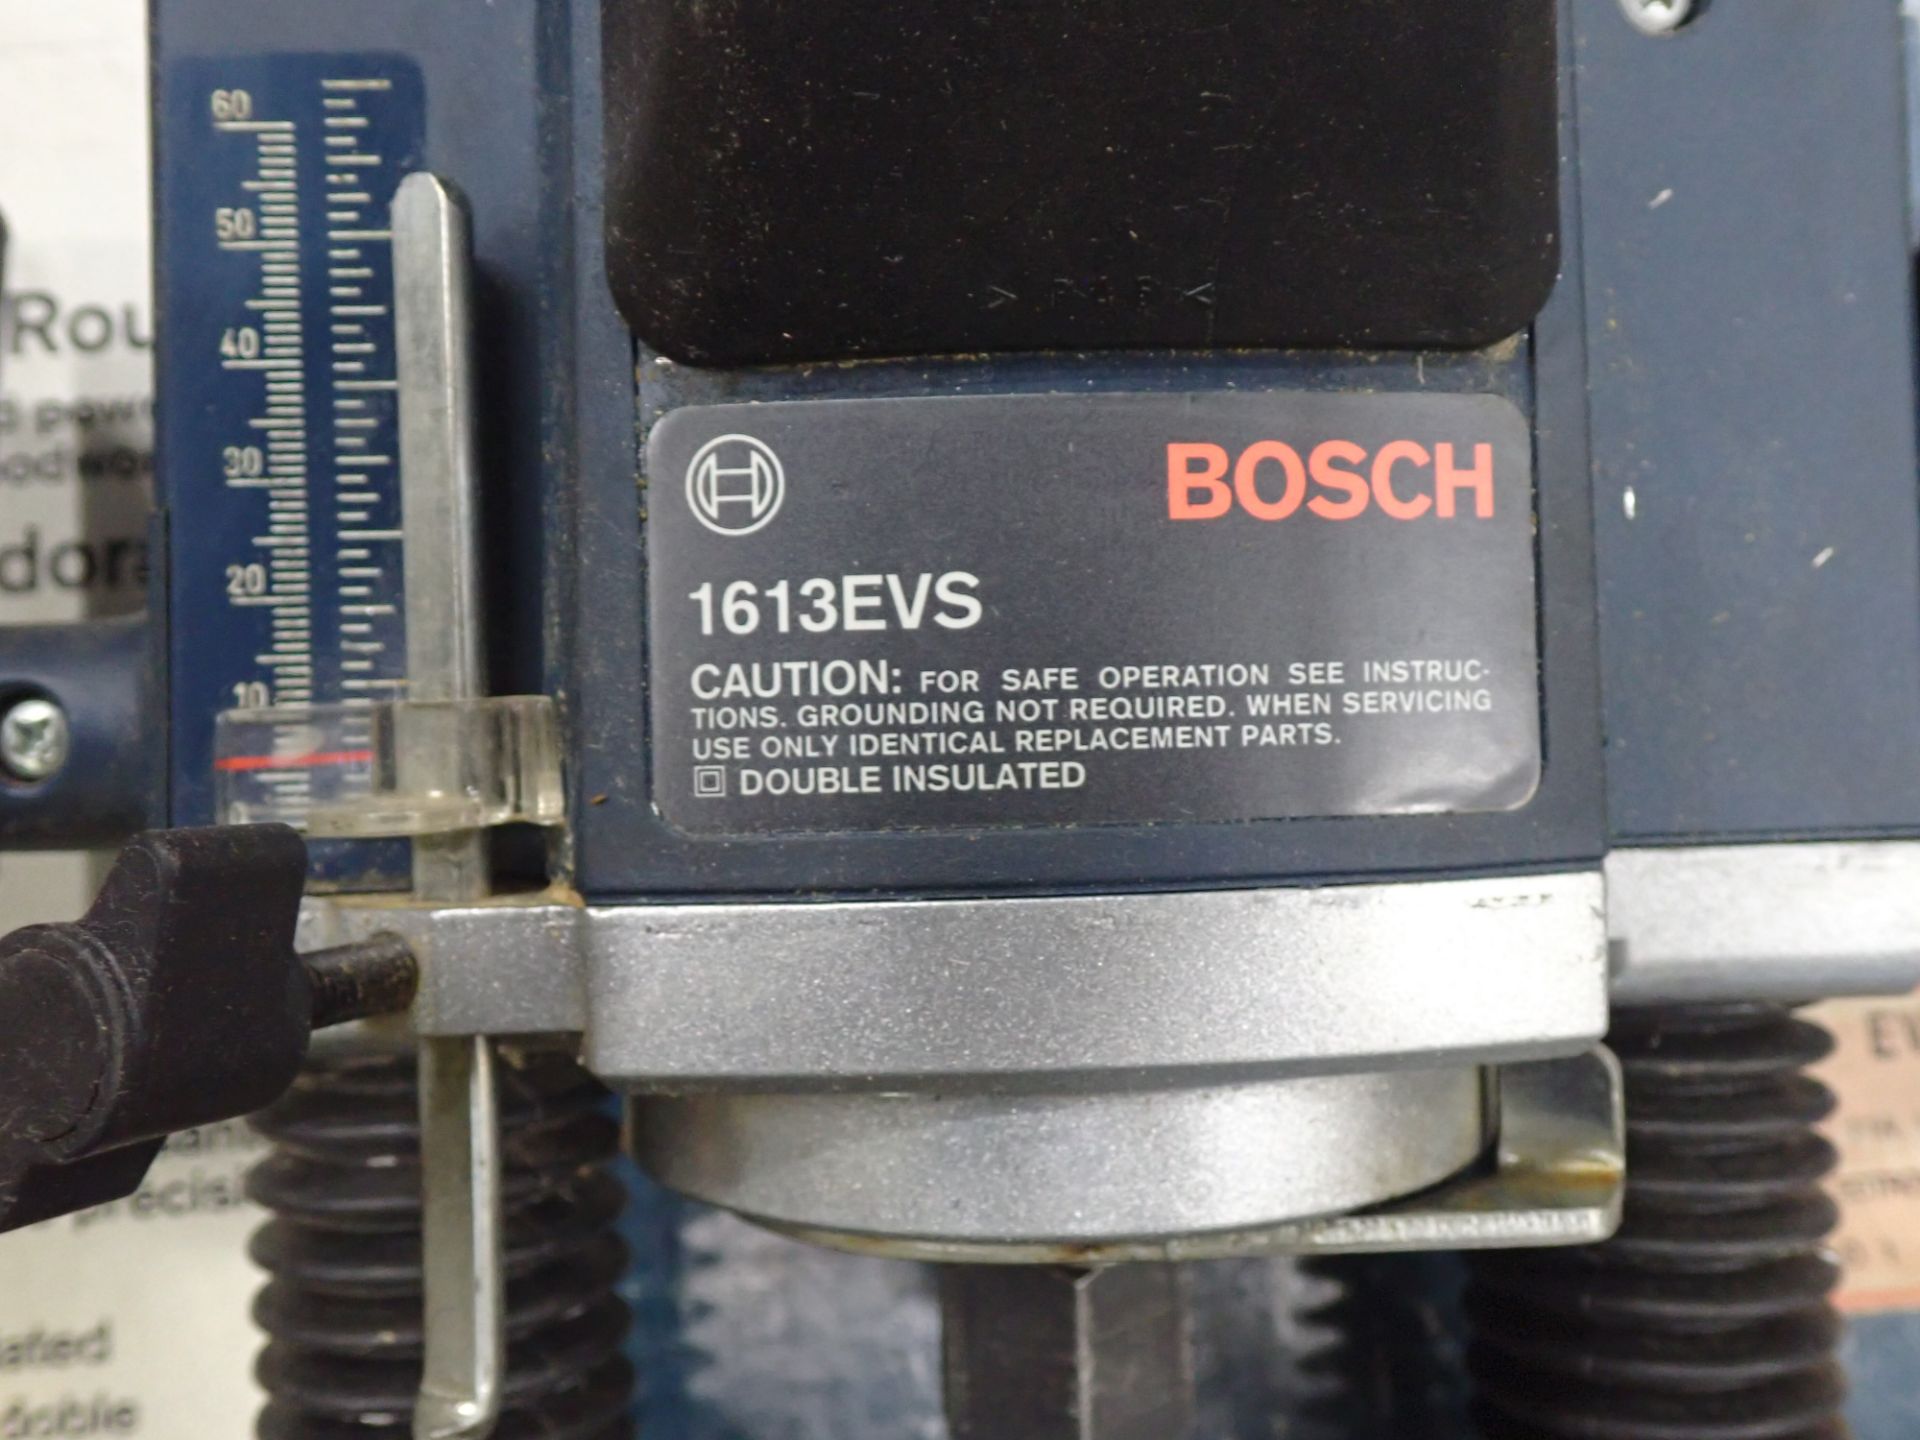 BOSCH 1613EVS ELECTRIC ROUTER - Image 2 of 3